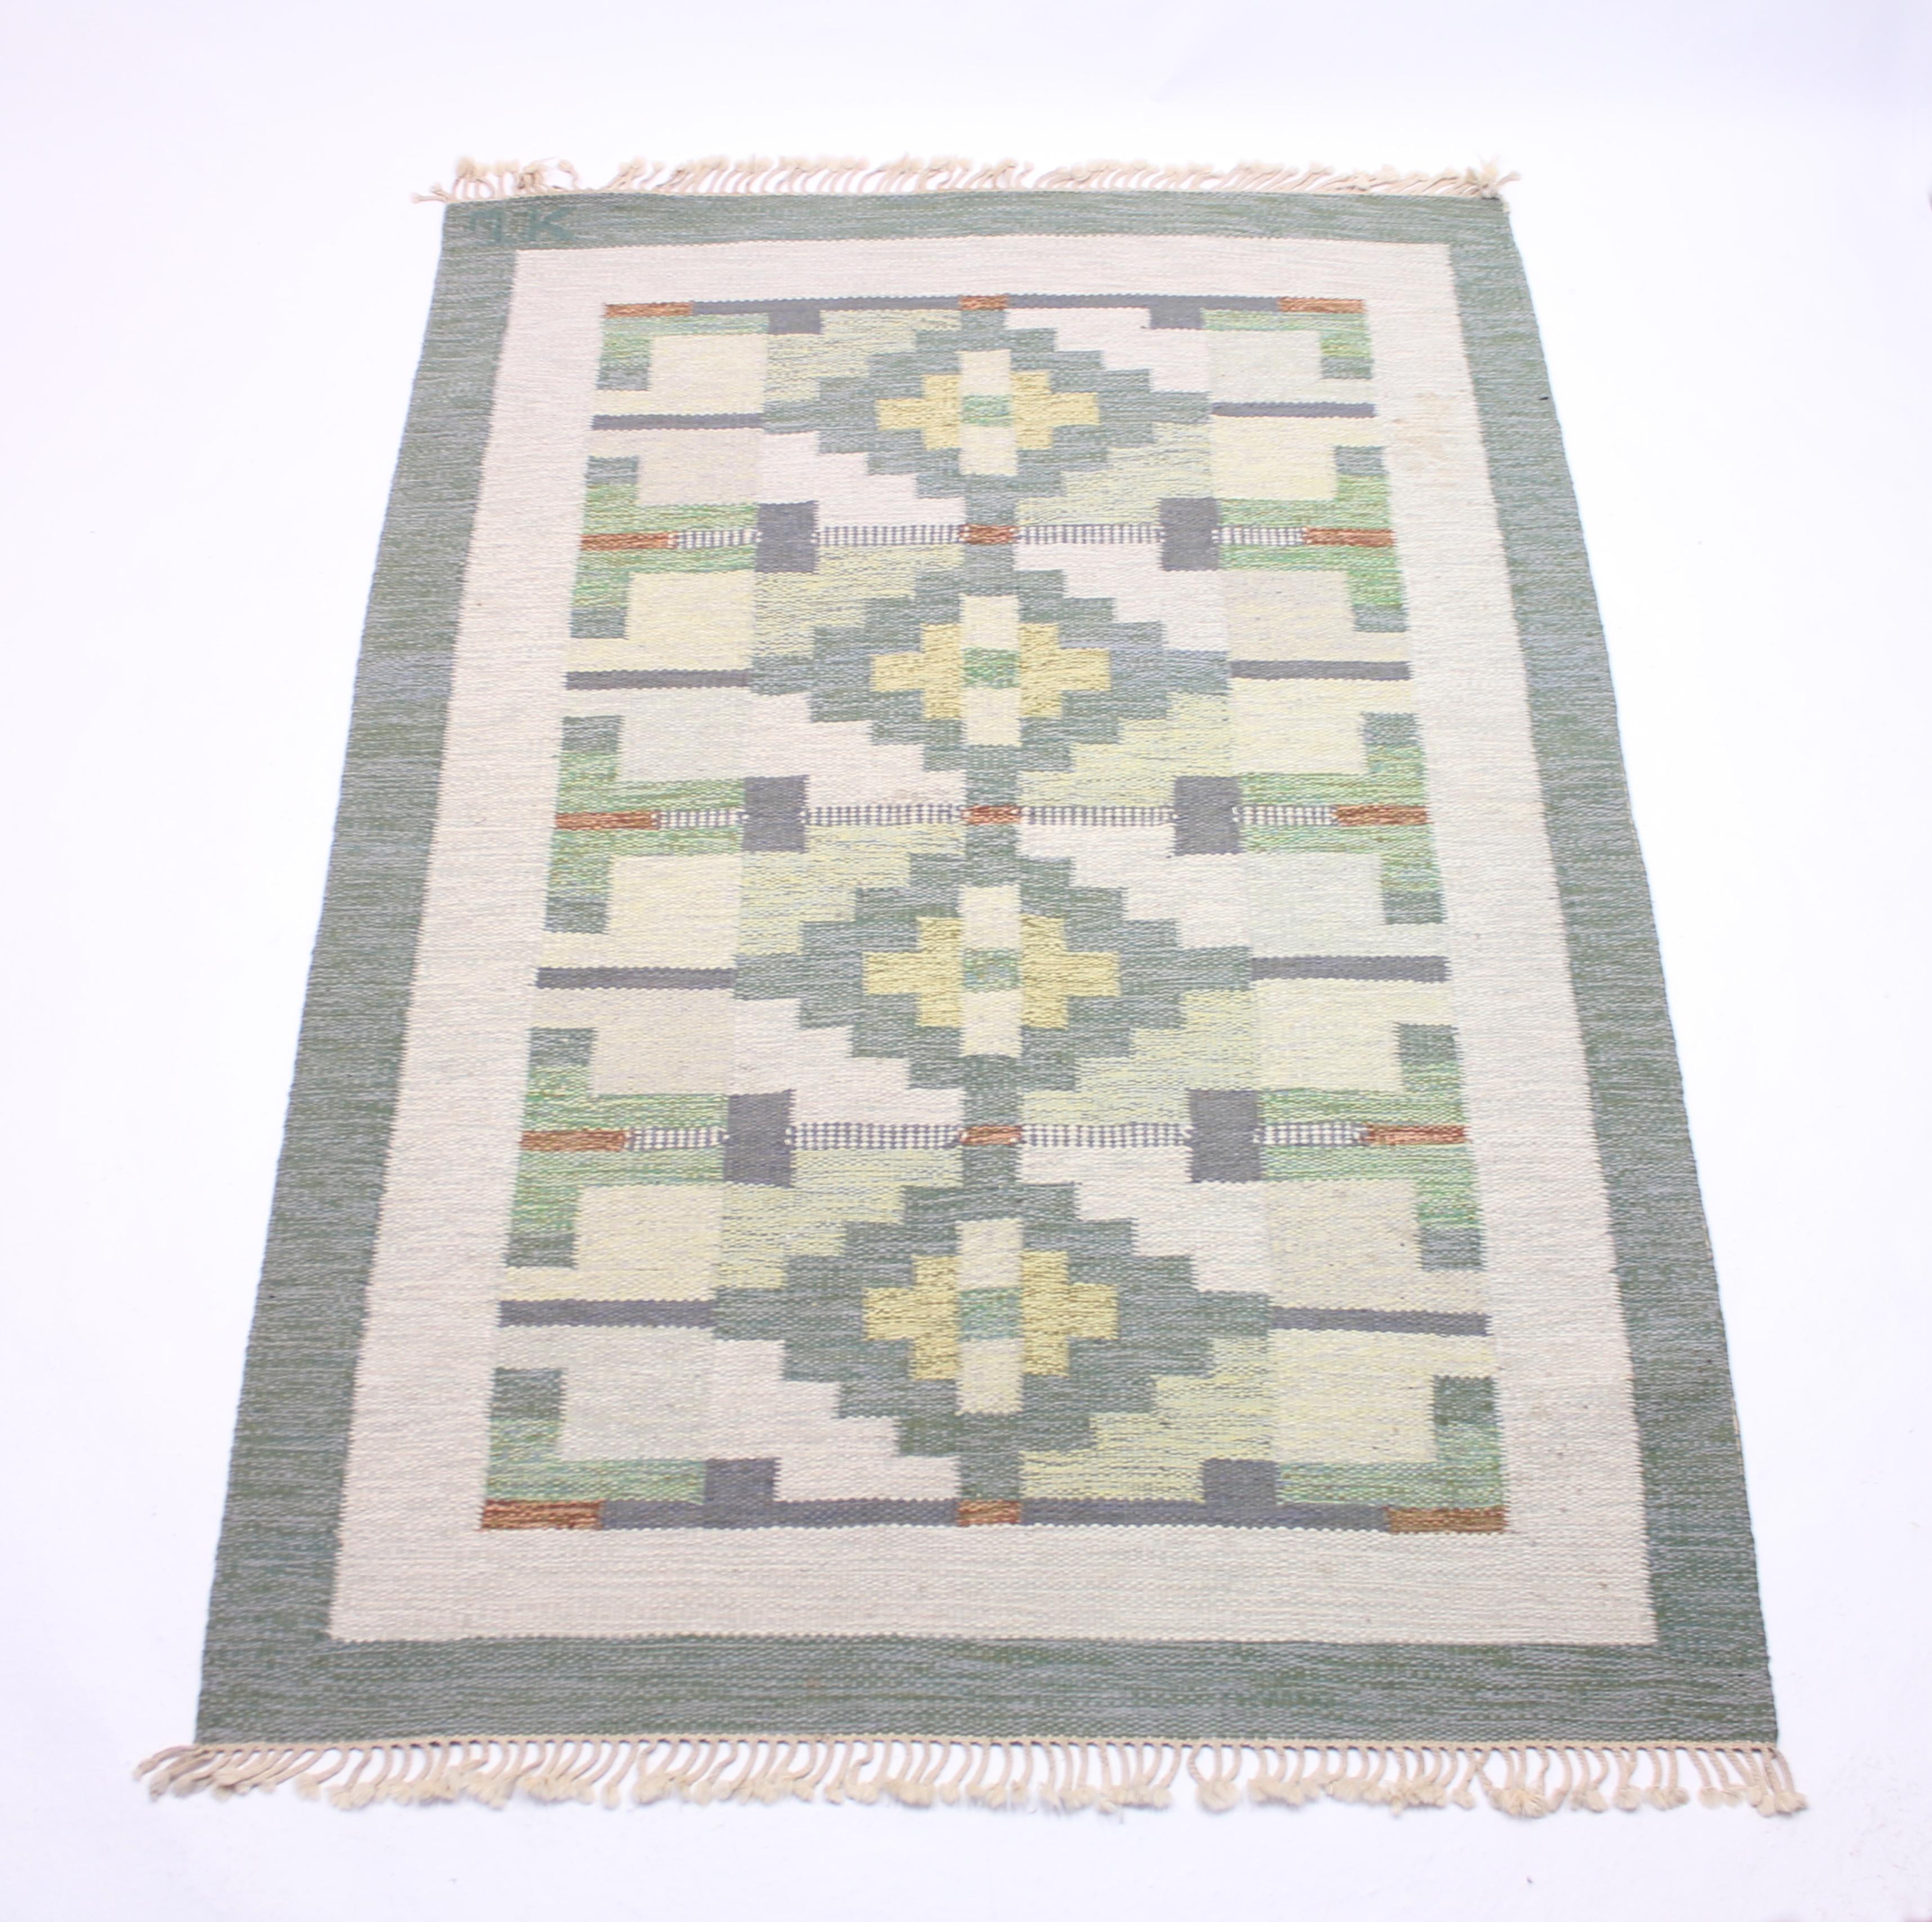 Swedish flat weave Röllakan carpet from the 1950s by unknown designer. Main colours are green and white with a dose of grey. Newly cleaned by a professional carpet cleaning company. Very good vintage condition with minimal ware consistent with age